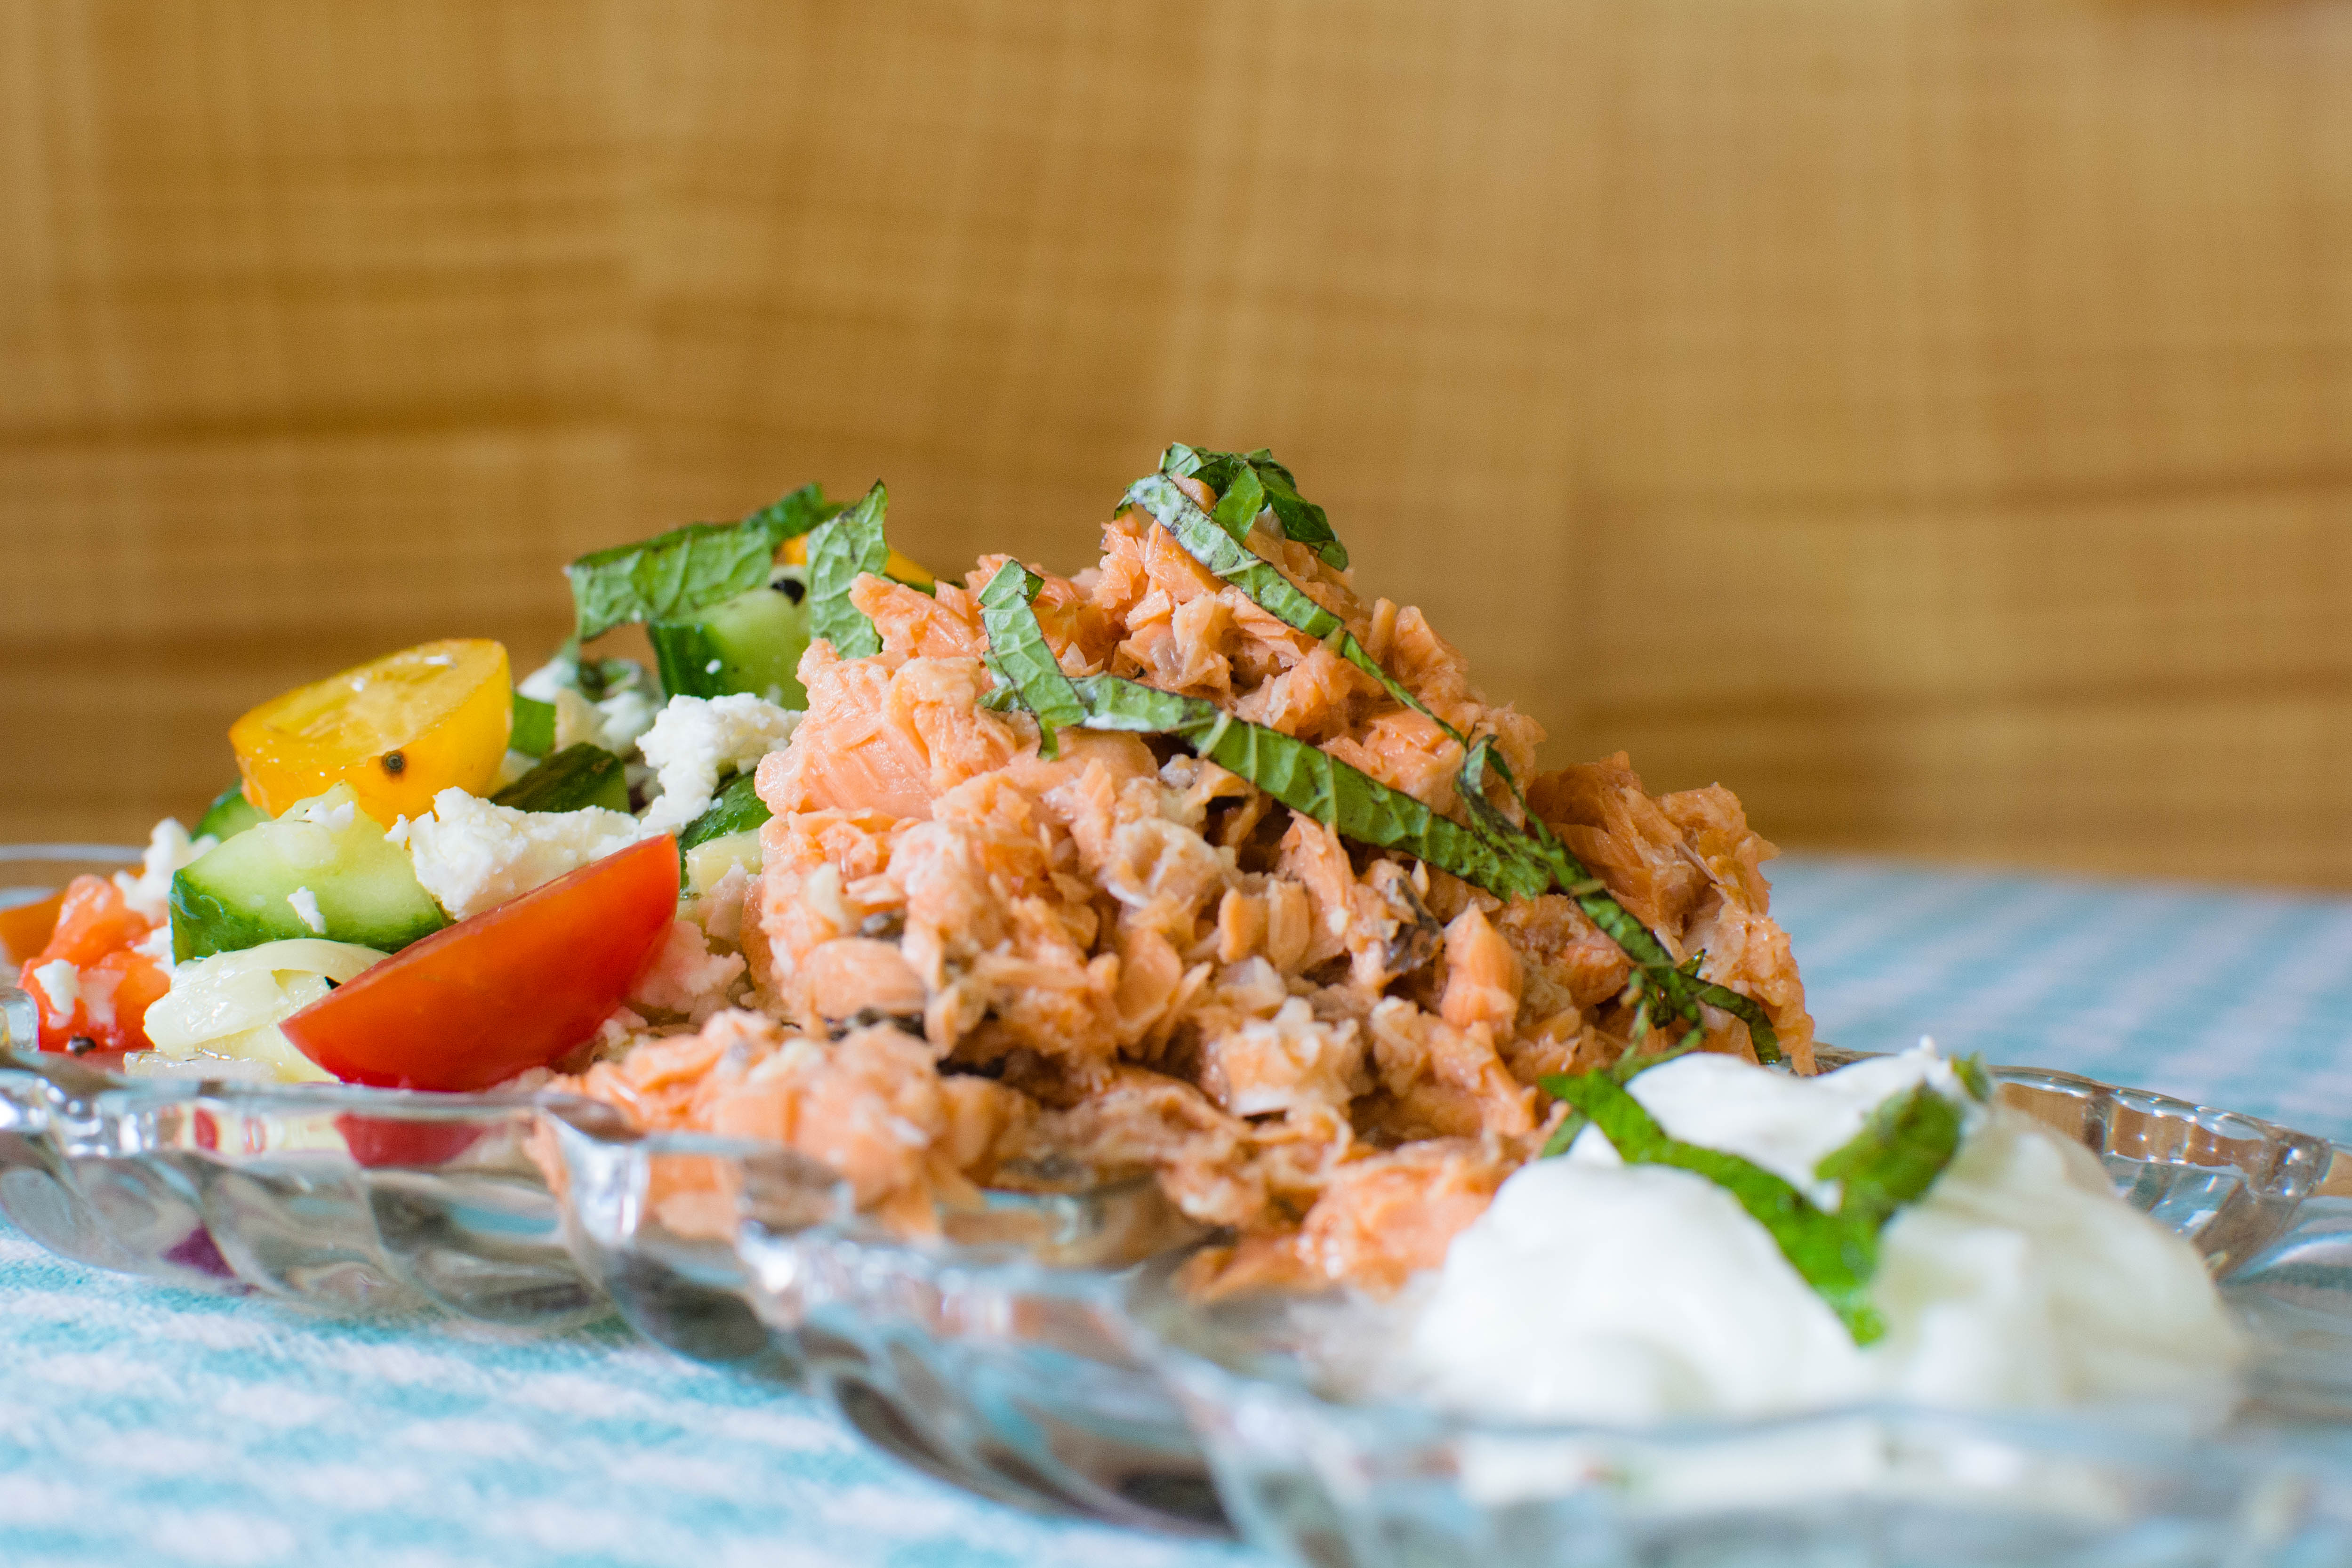 Greek Salad featuring canned salmon in a glass dish